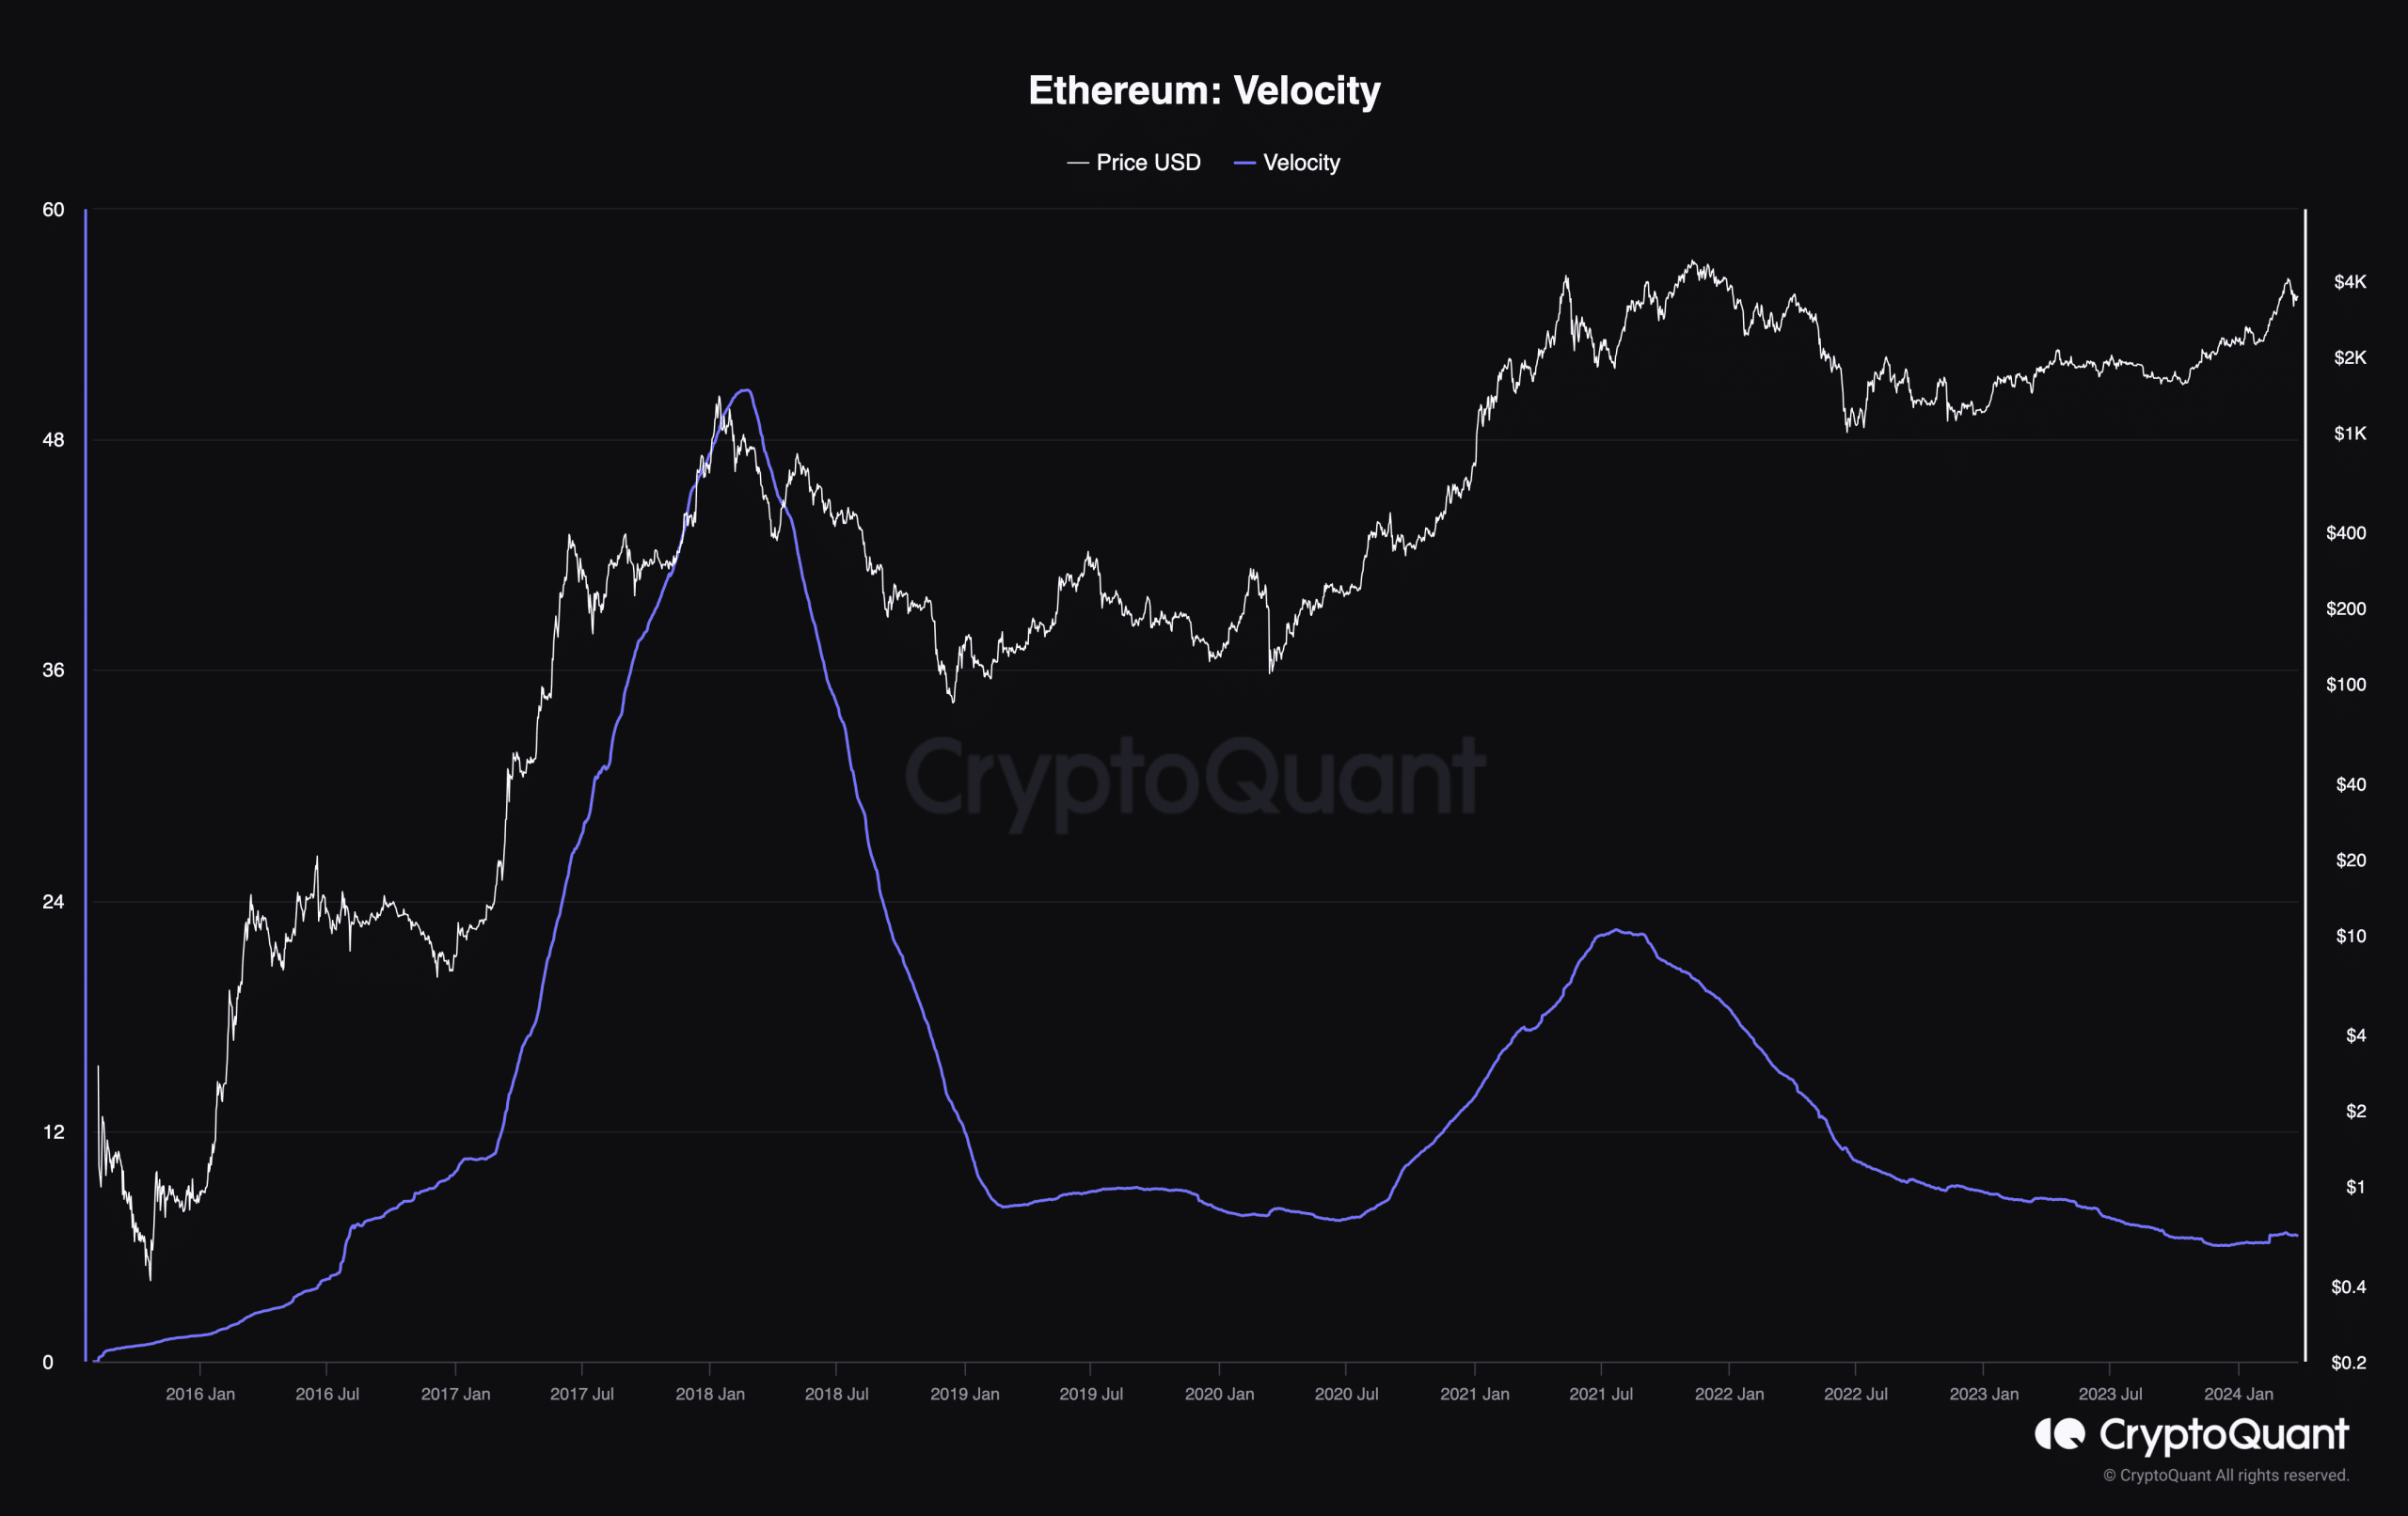 Ethereum falling velocity, signaling a price increase